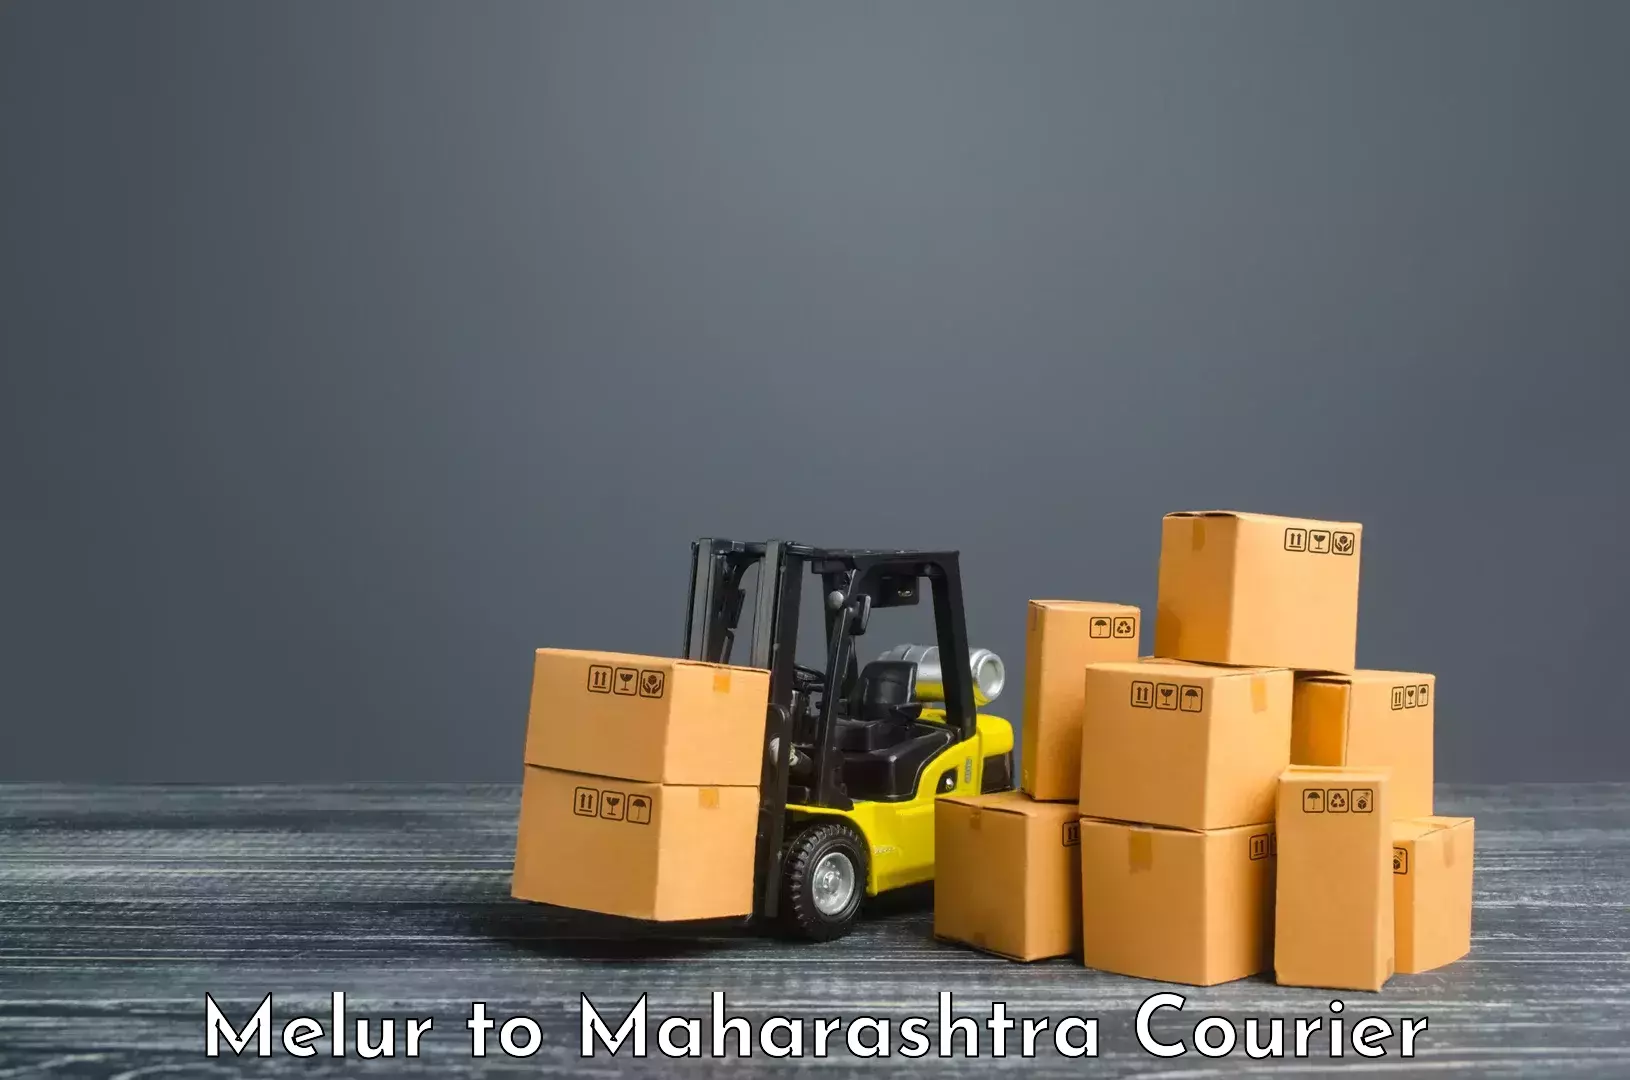 User-friendly delivery service Melur to Maharashtra